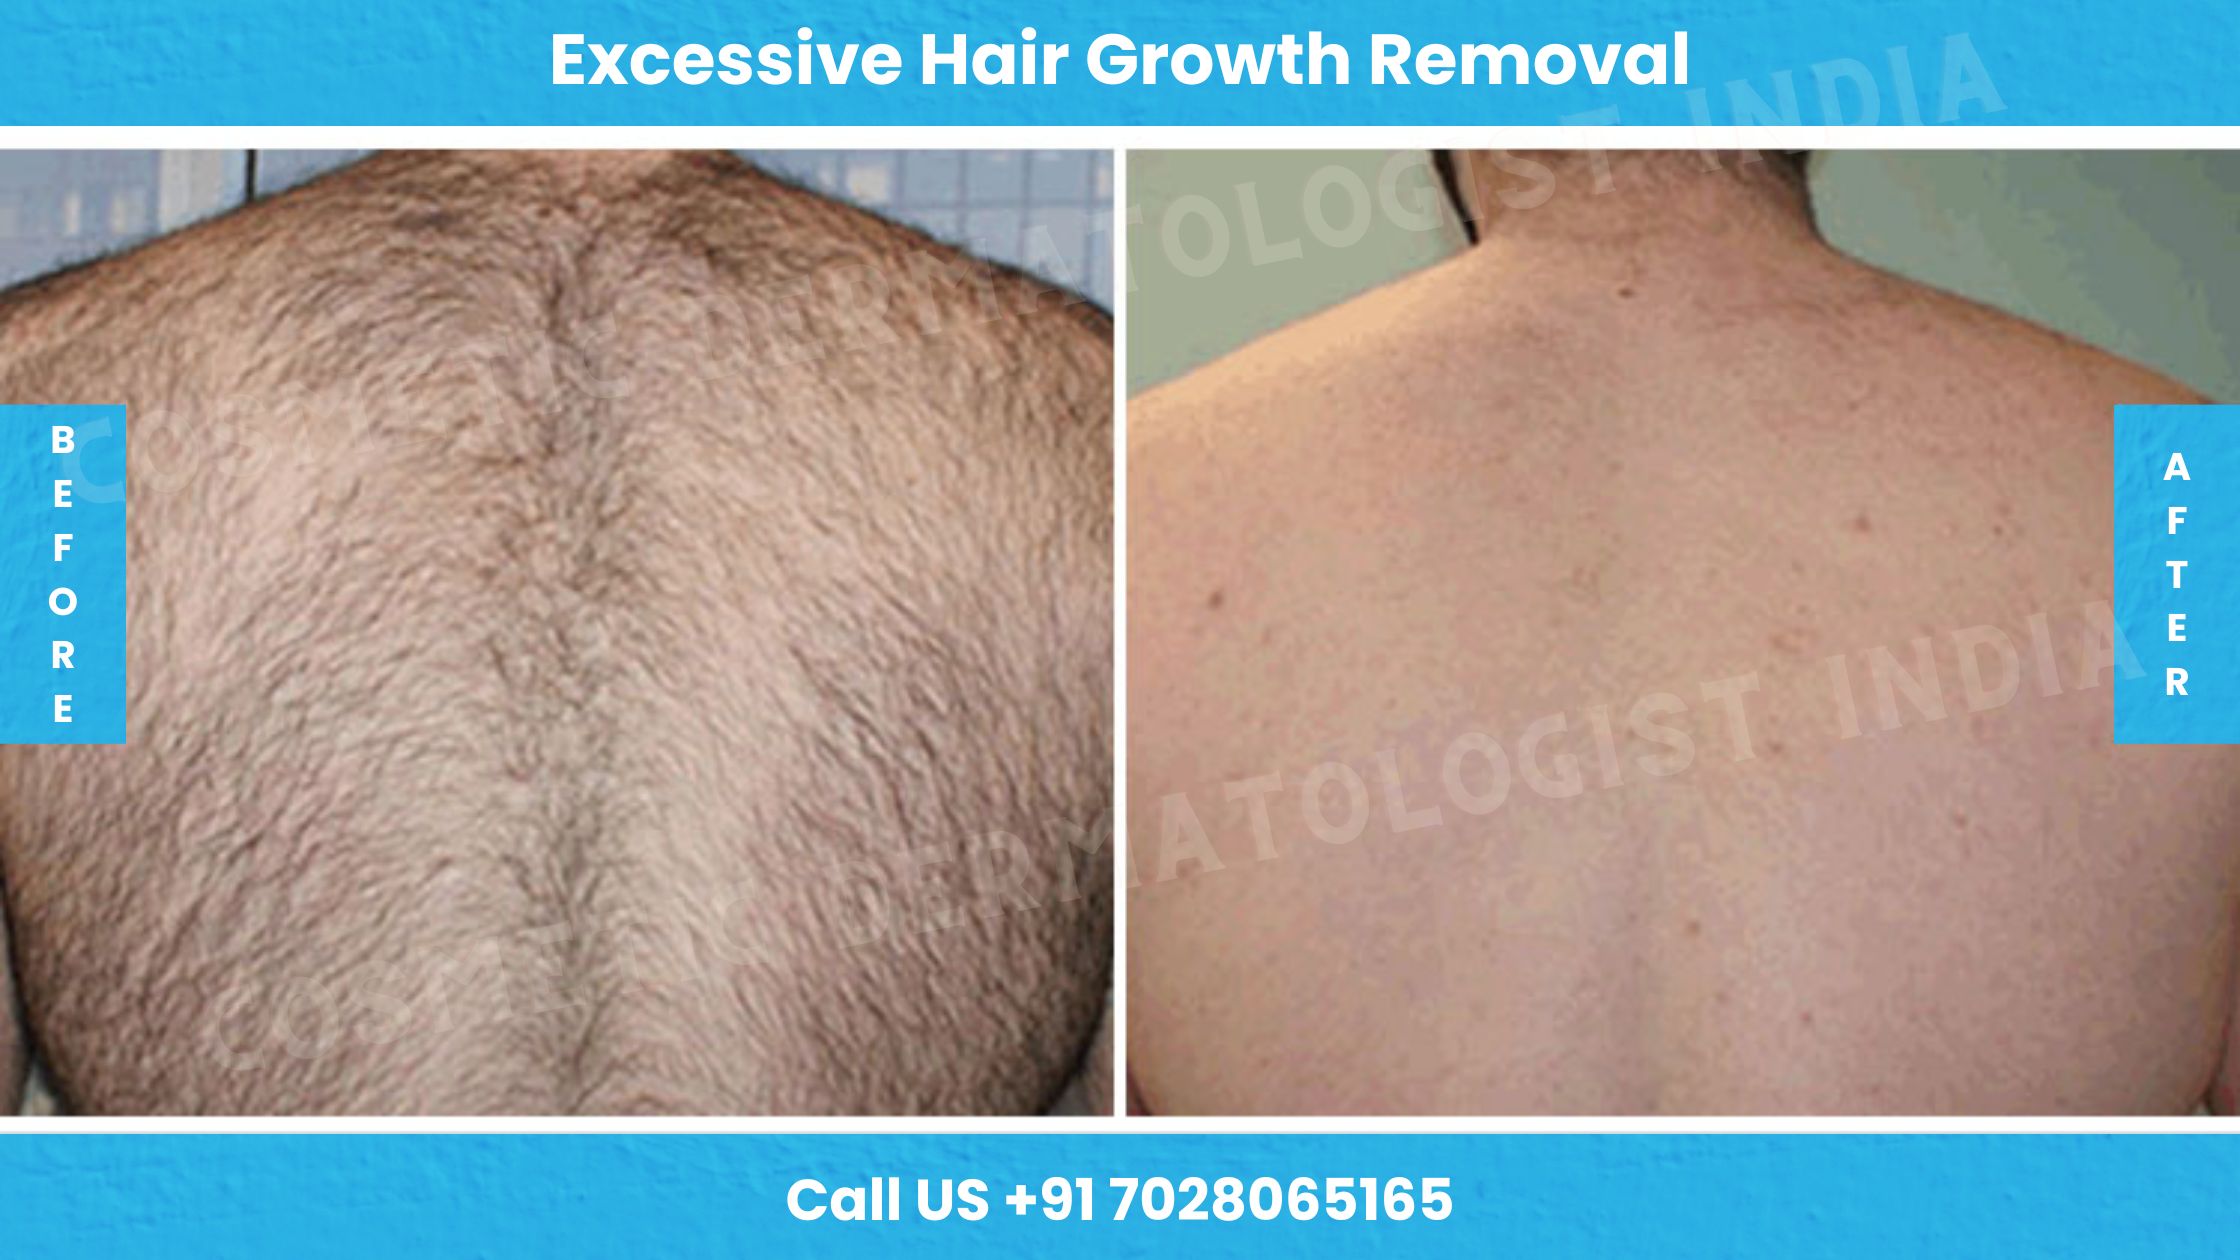 Before and After images of Excessive Hair Growth Removal Treatment